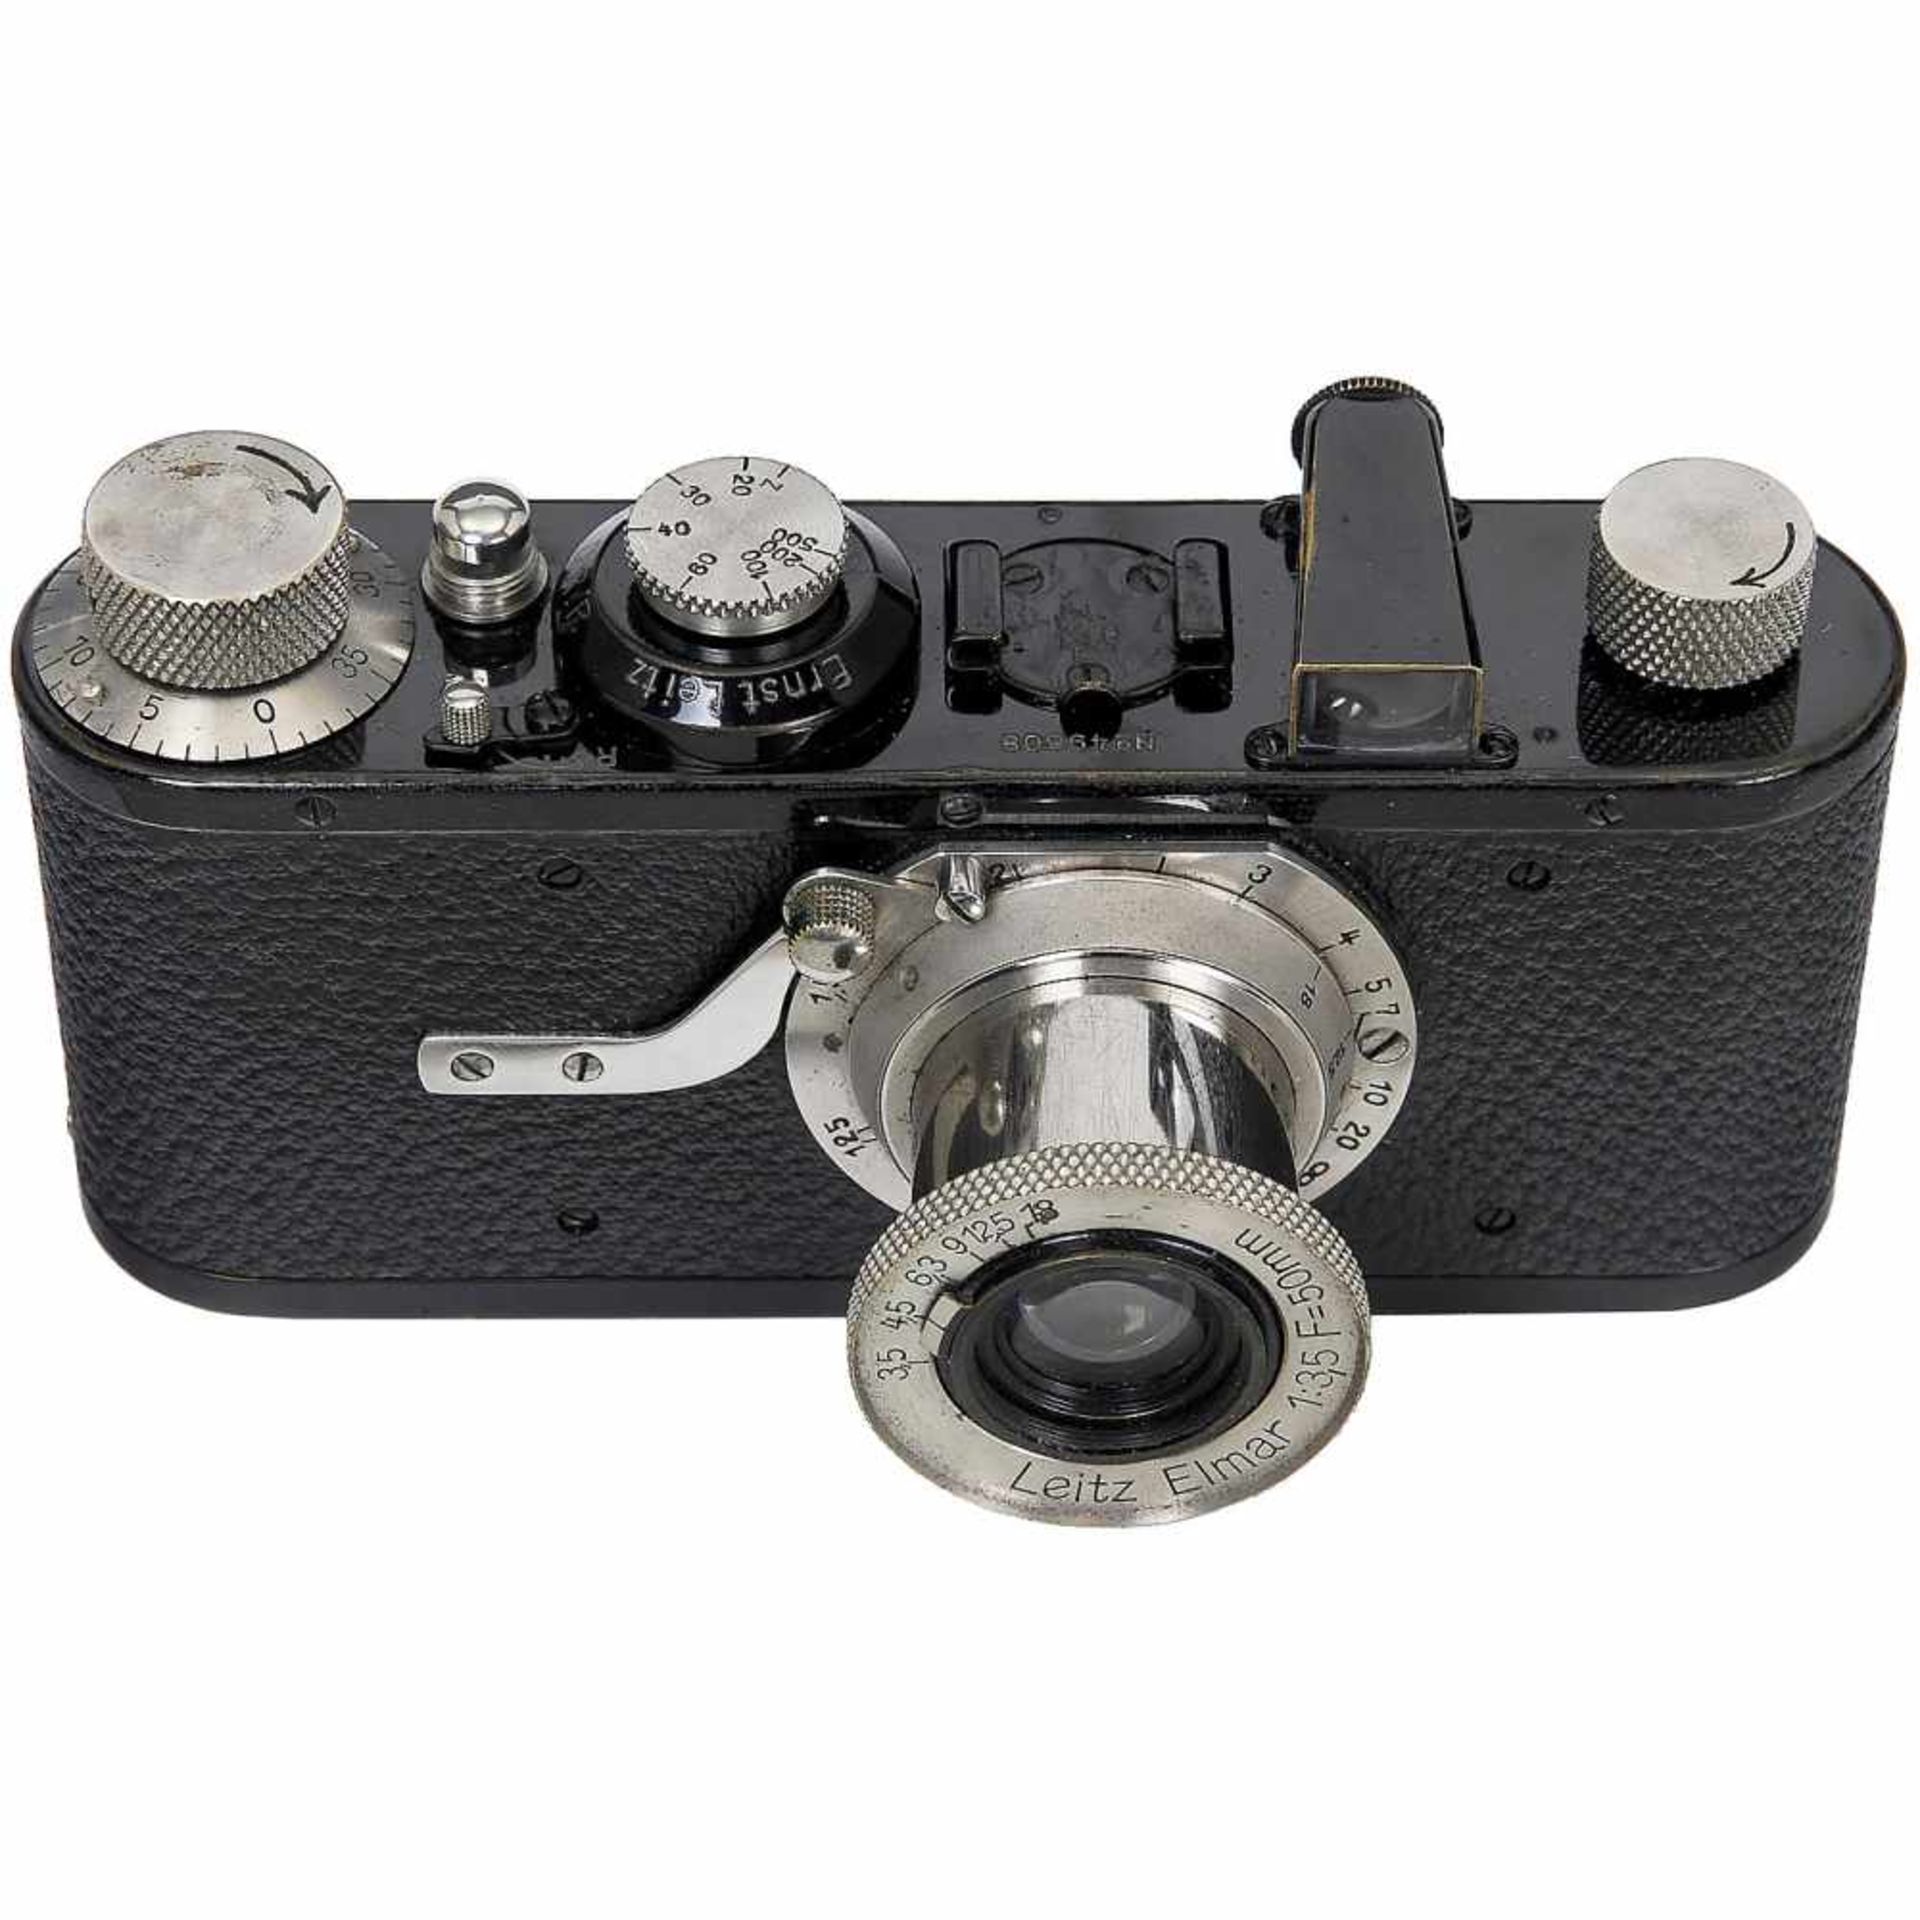 Leica I with "Stereoly" Stereo Outfit and VOTRA. c. 1930 - Bild 3 aus 3